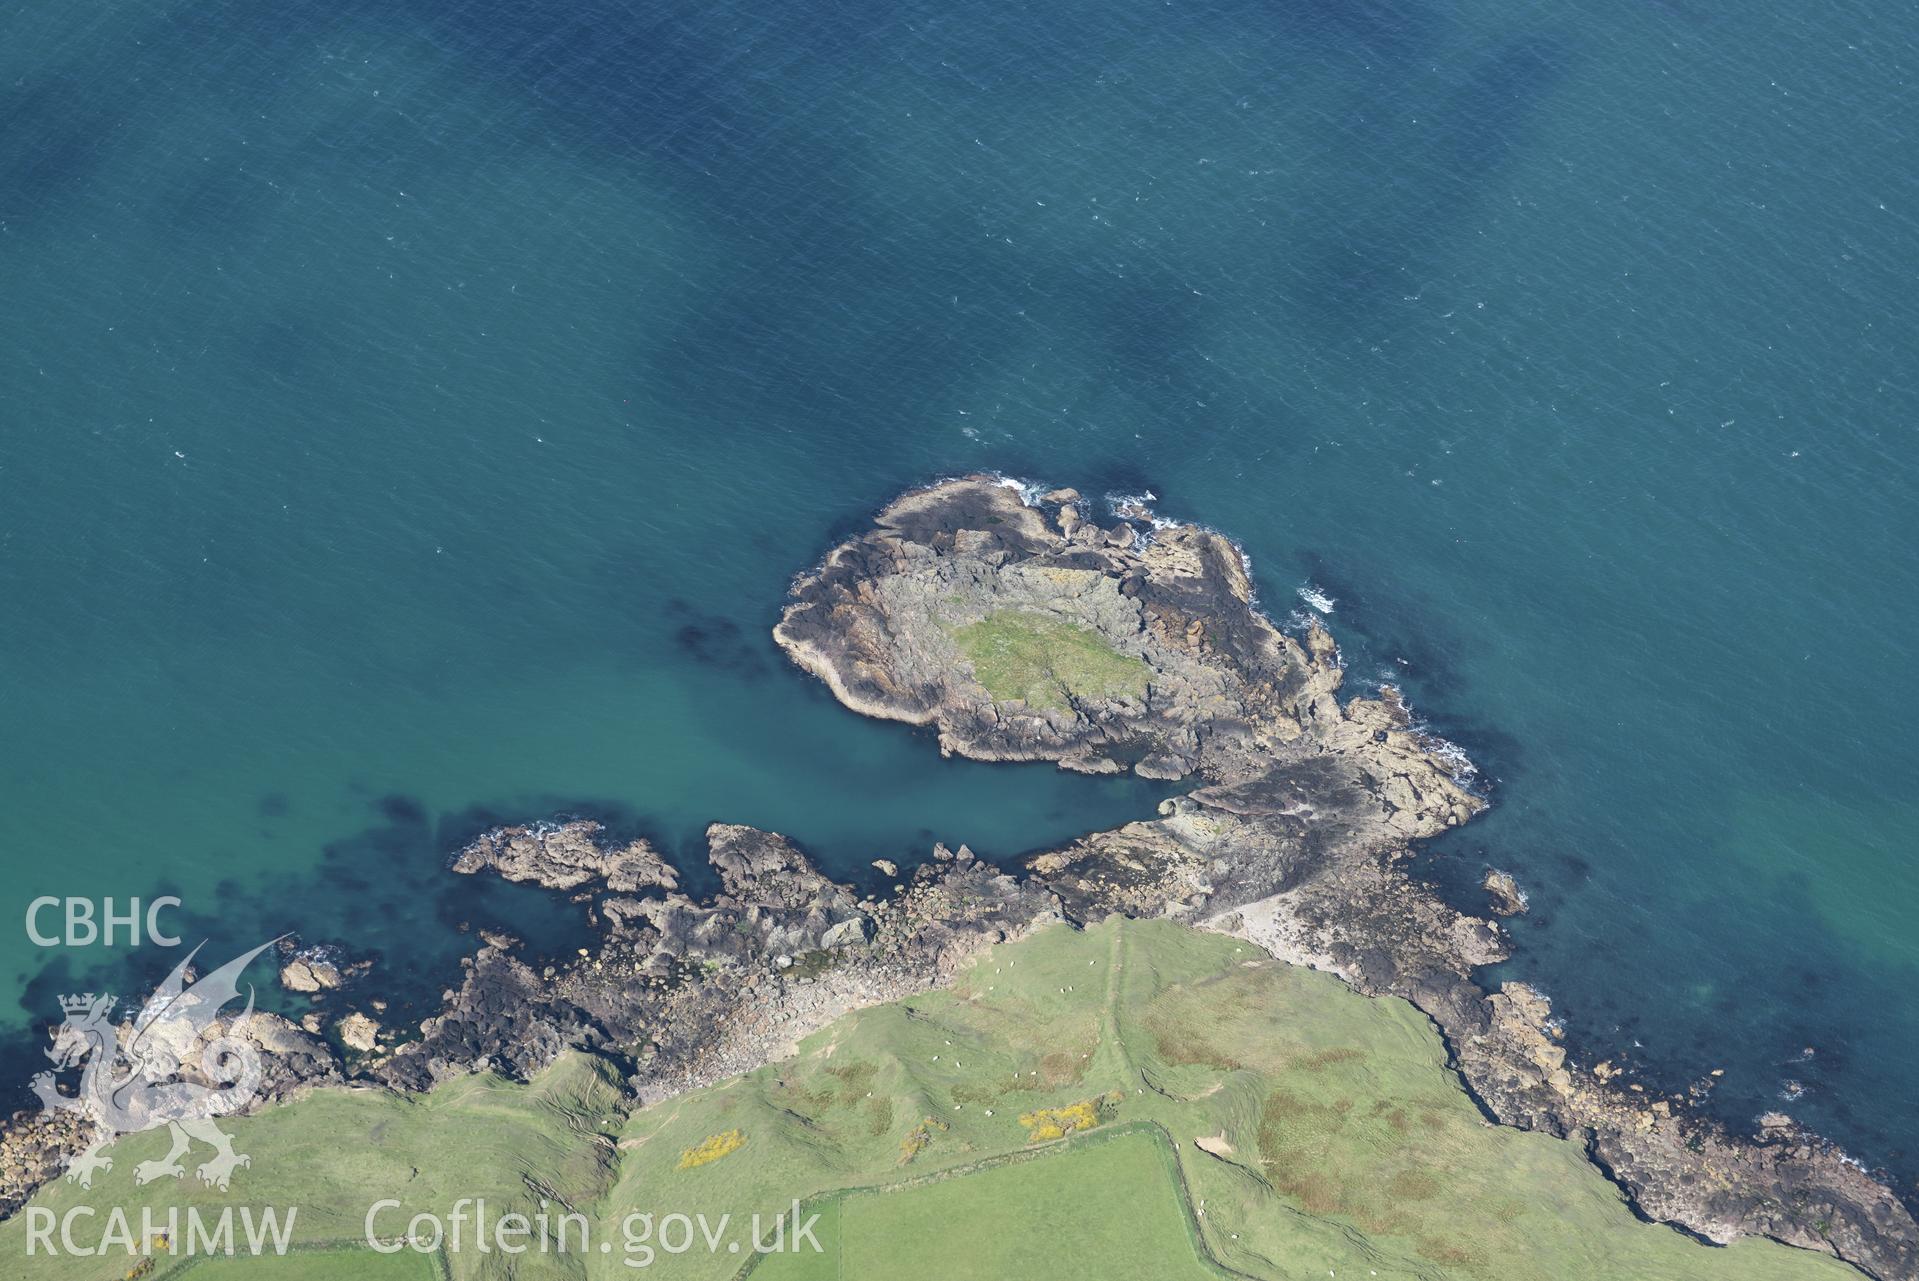 Aerial photography of carreg field system taken on 3rd May 2017.  Baseline aerial reconnaissance survey for the CHERISH Project. ? Crown: CHERISH PROJECT 2017. Produced with EU funds through the Ireland Wales Co-operation Programme 2014-2020. All material made freely available through the Open Government Licence.